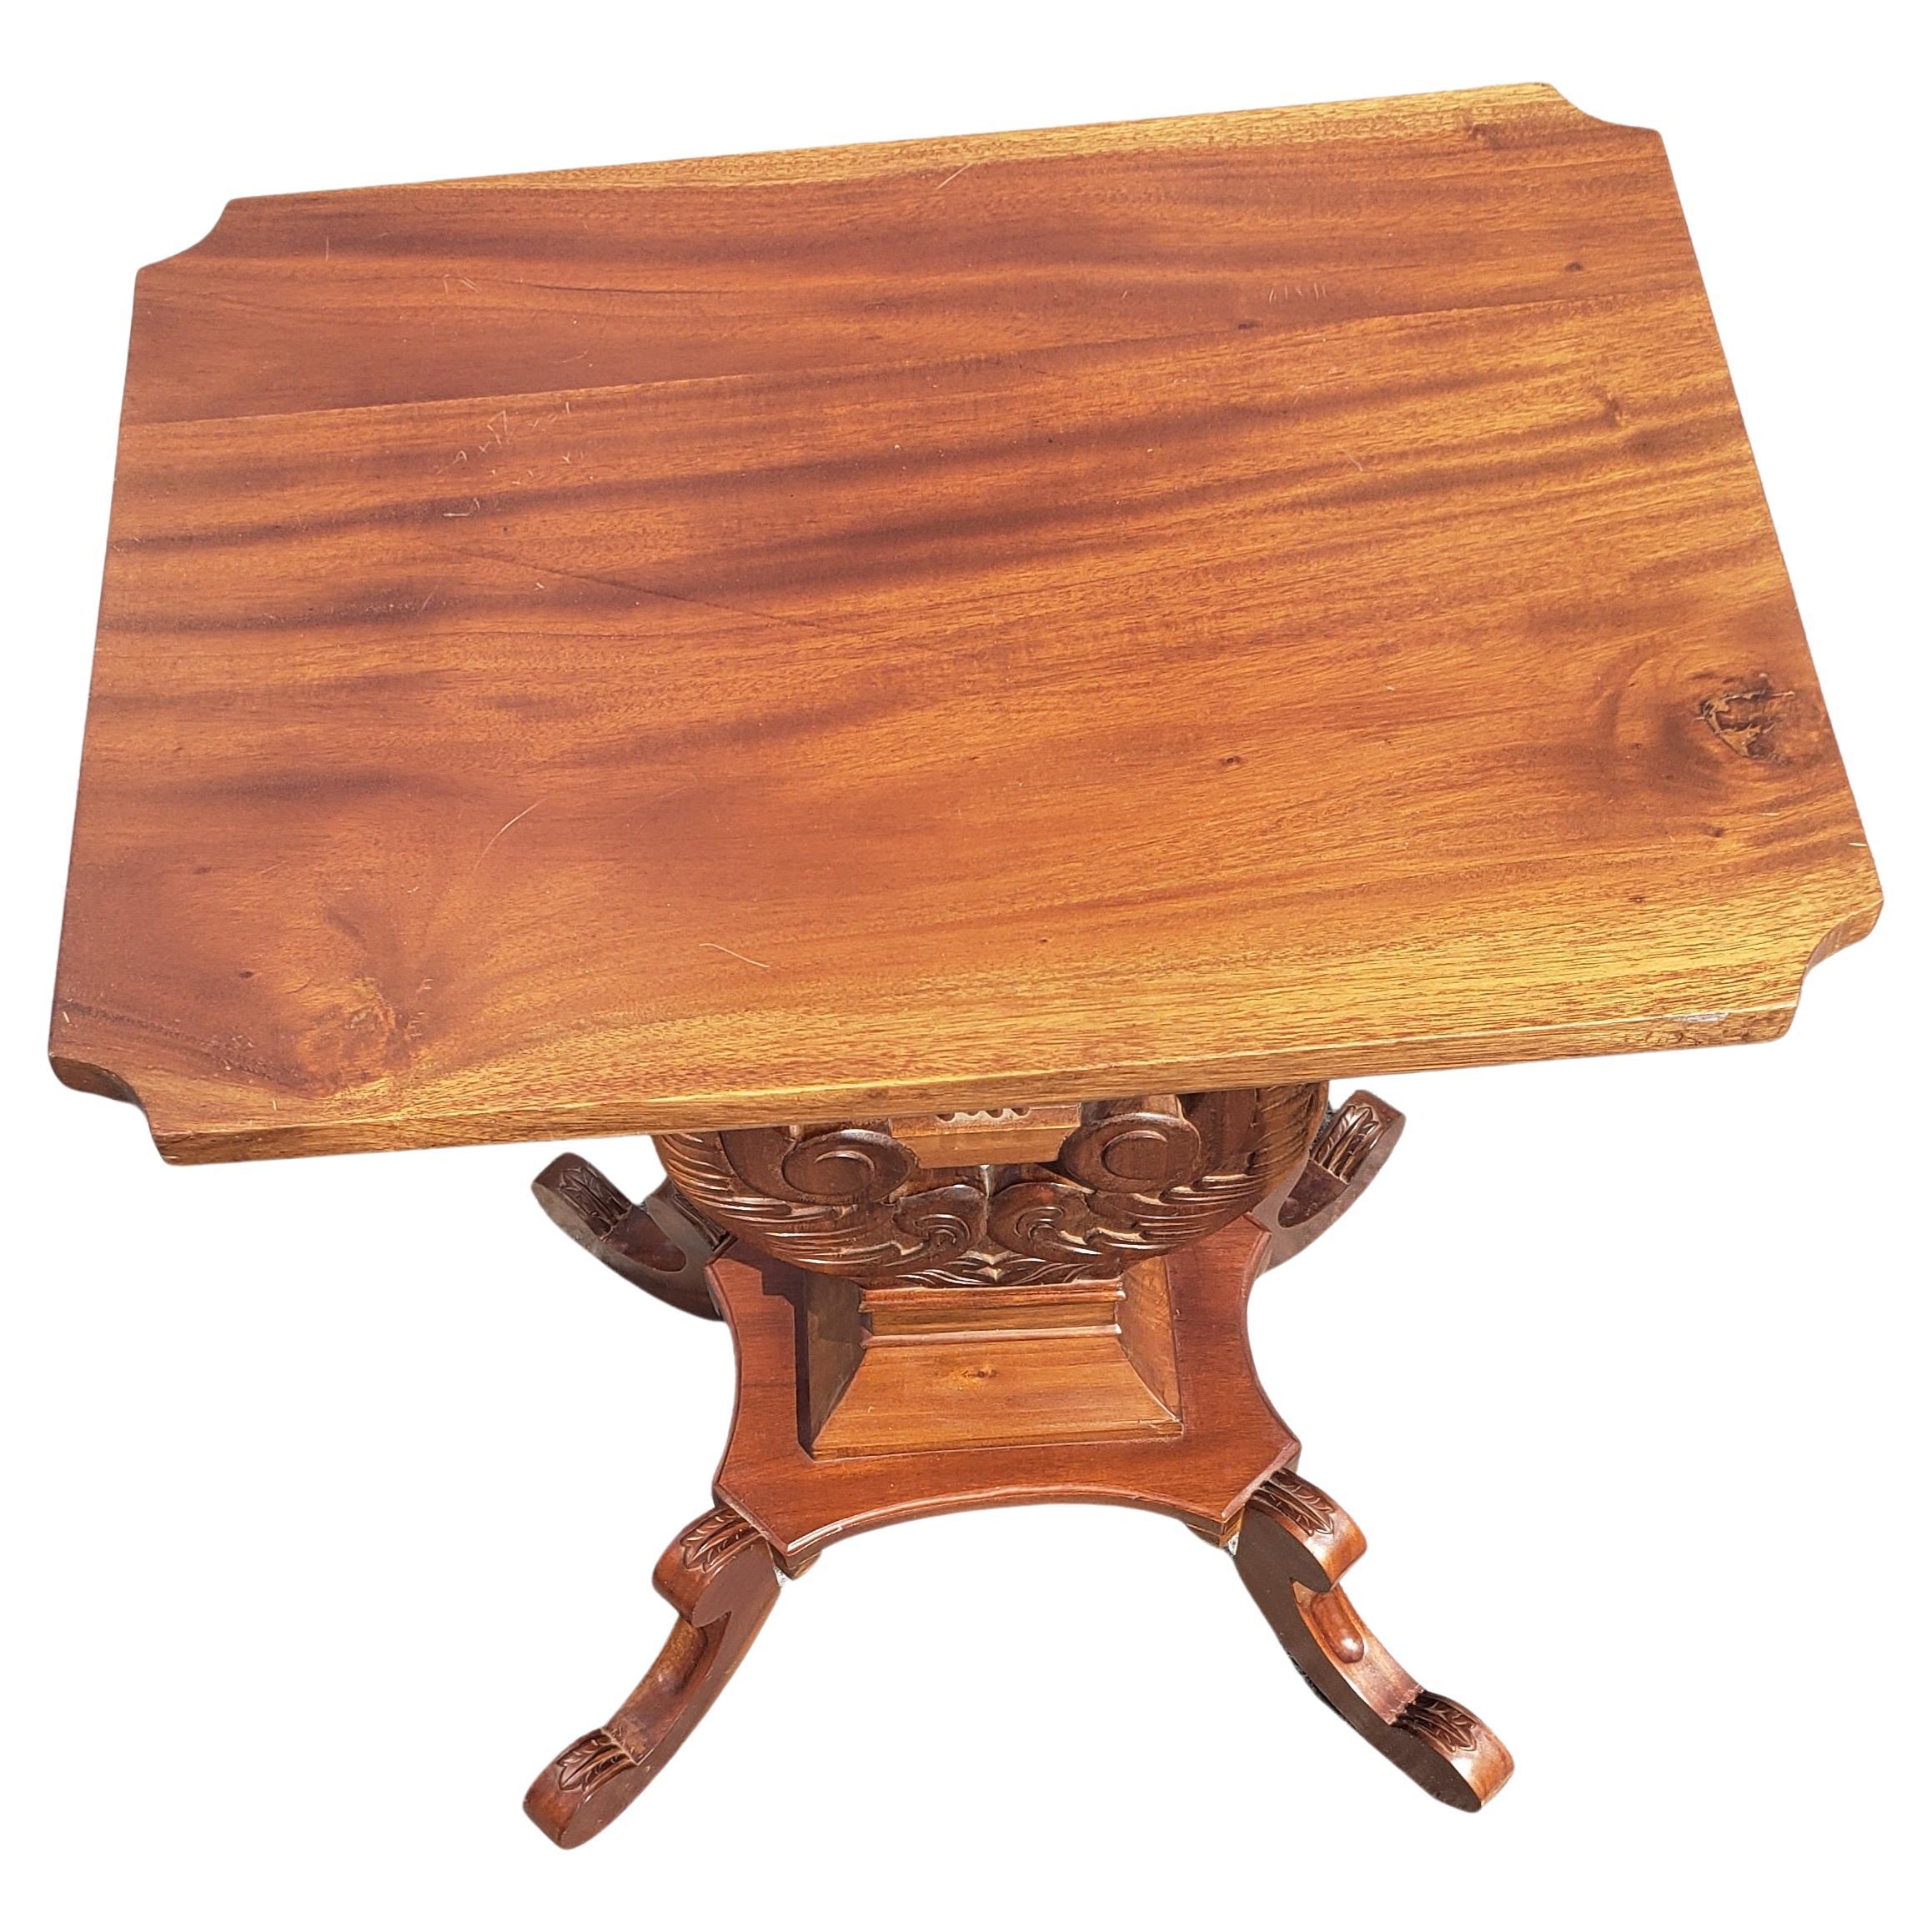 American Colonial American Empire Mahogany Rectangular Lyre Base Side Table, C 1940s For Sale